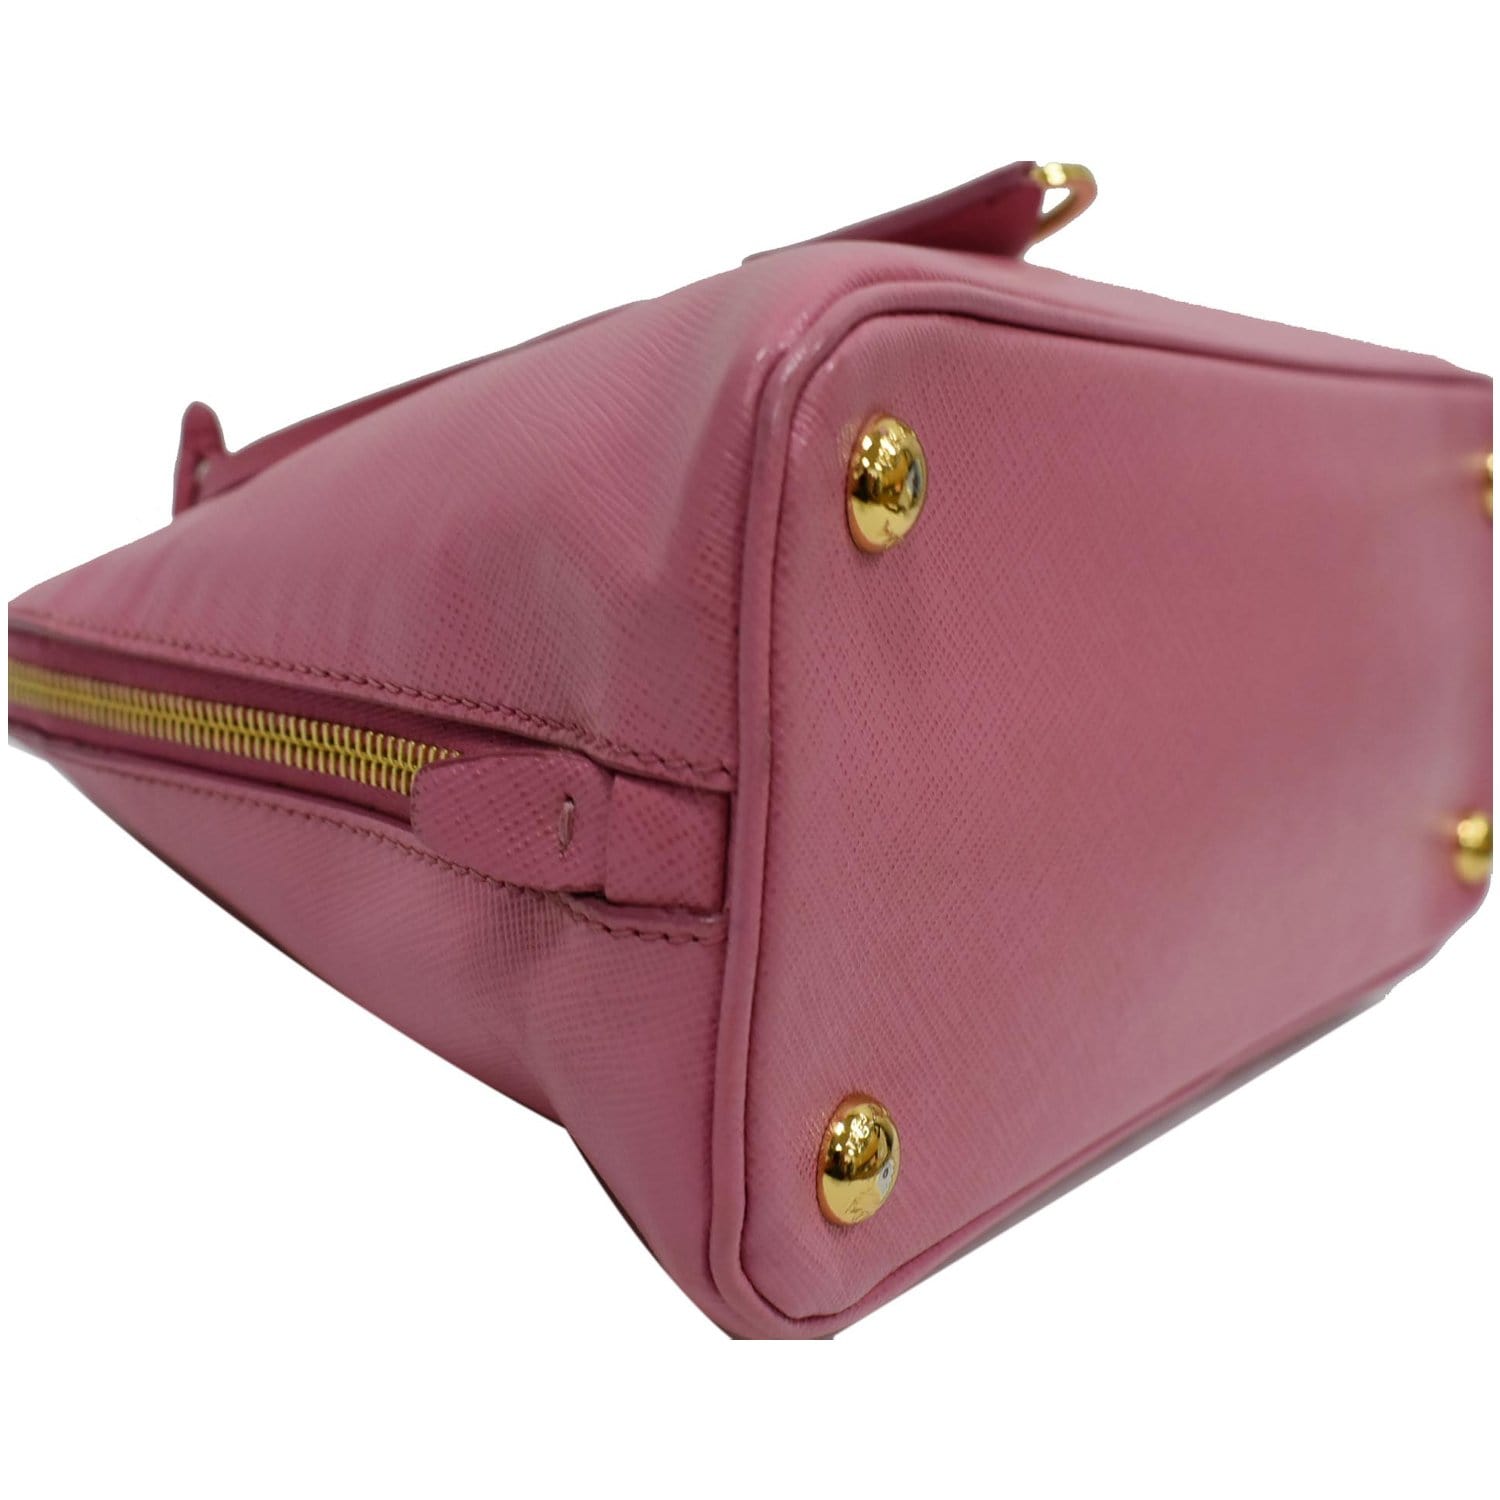 Sold at Auction: Prada Saffiano Pink Mini Leather Zip Up Hand Bag -  Crossbody Shoulder Strap